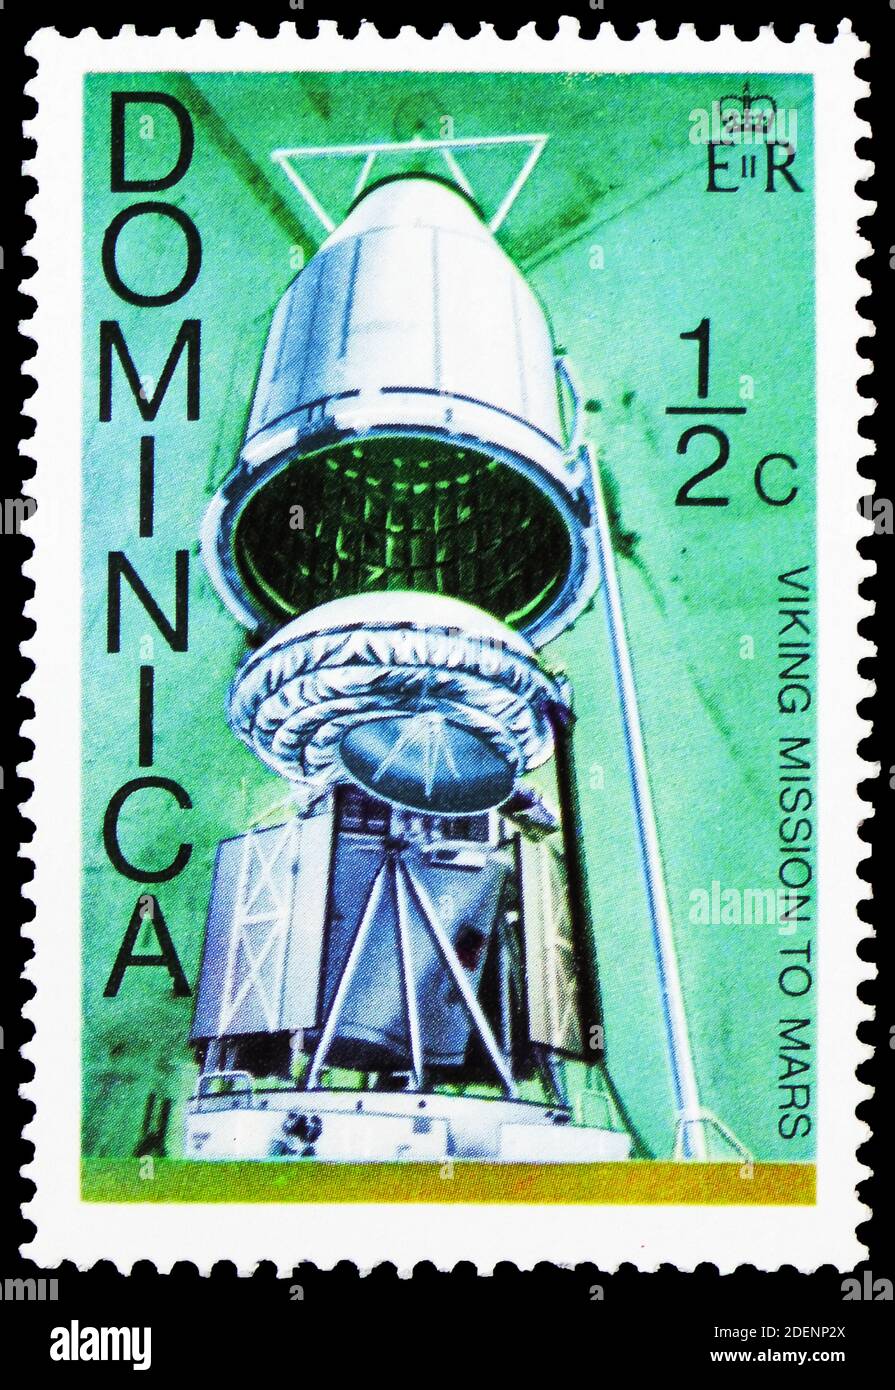 MOSCOW, RUSSIA - JUNE 28, 2020: Postage stamp printed in Dominica shows Viking Spacecraft, Viking Mission to Mars serie, circa 1976 Stock Photo